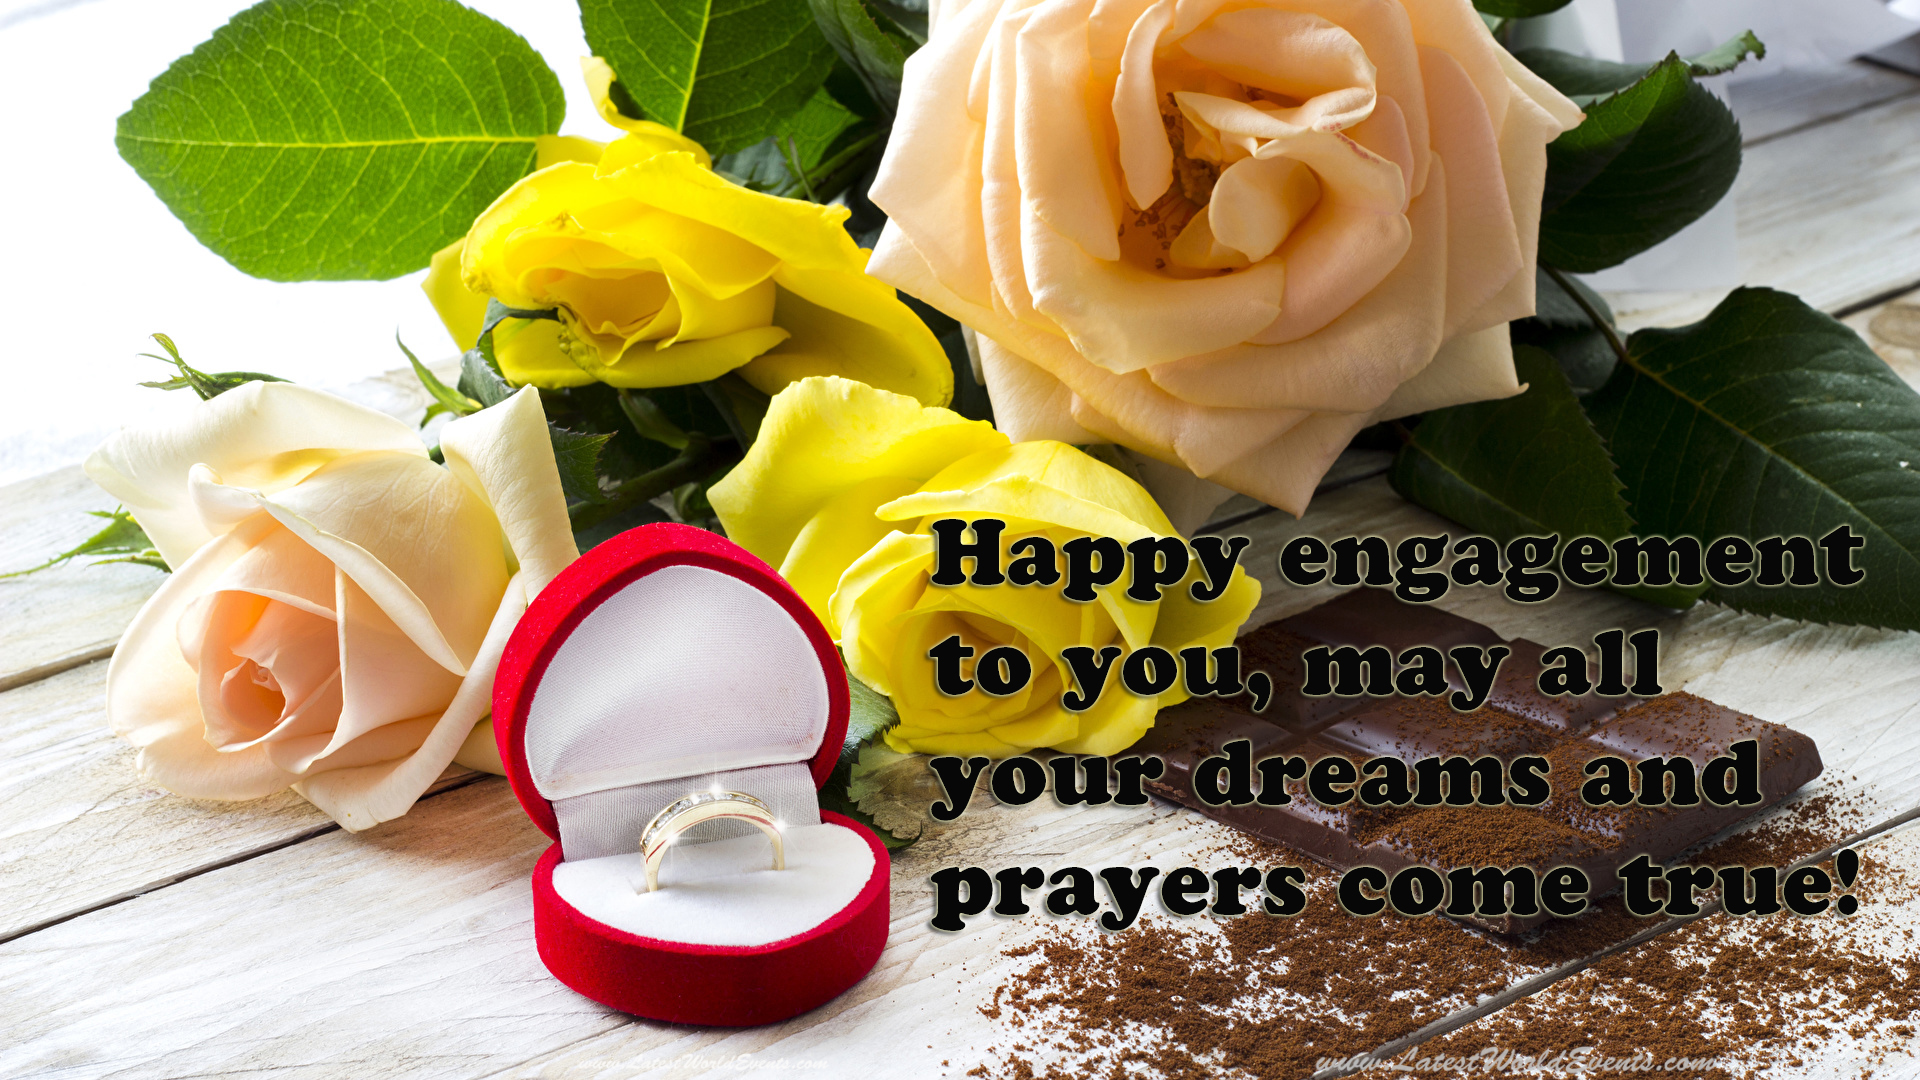 engagement-wishes-for-fiance